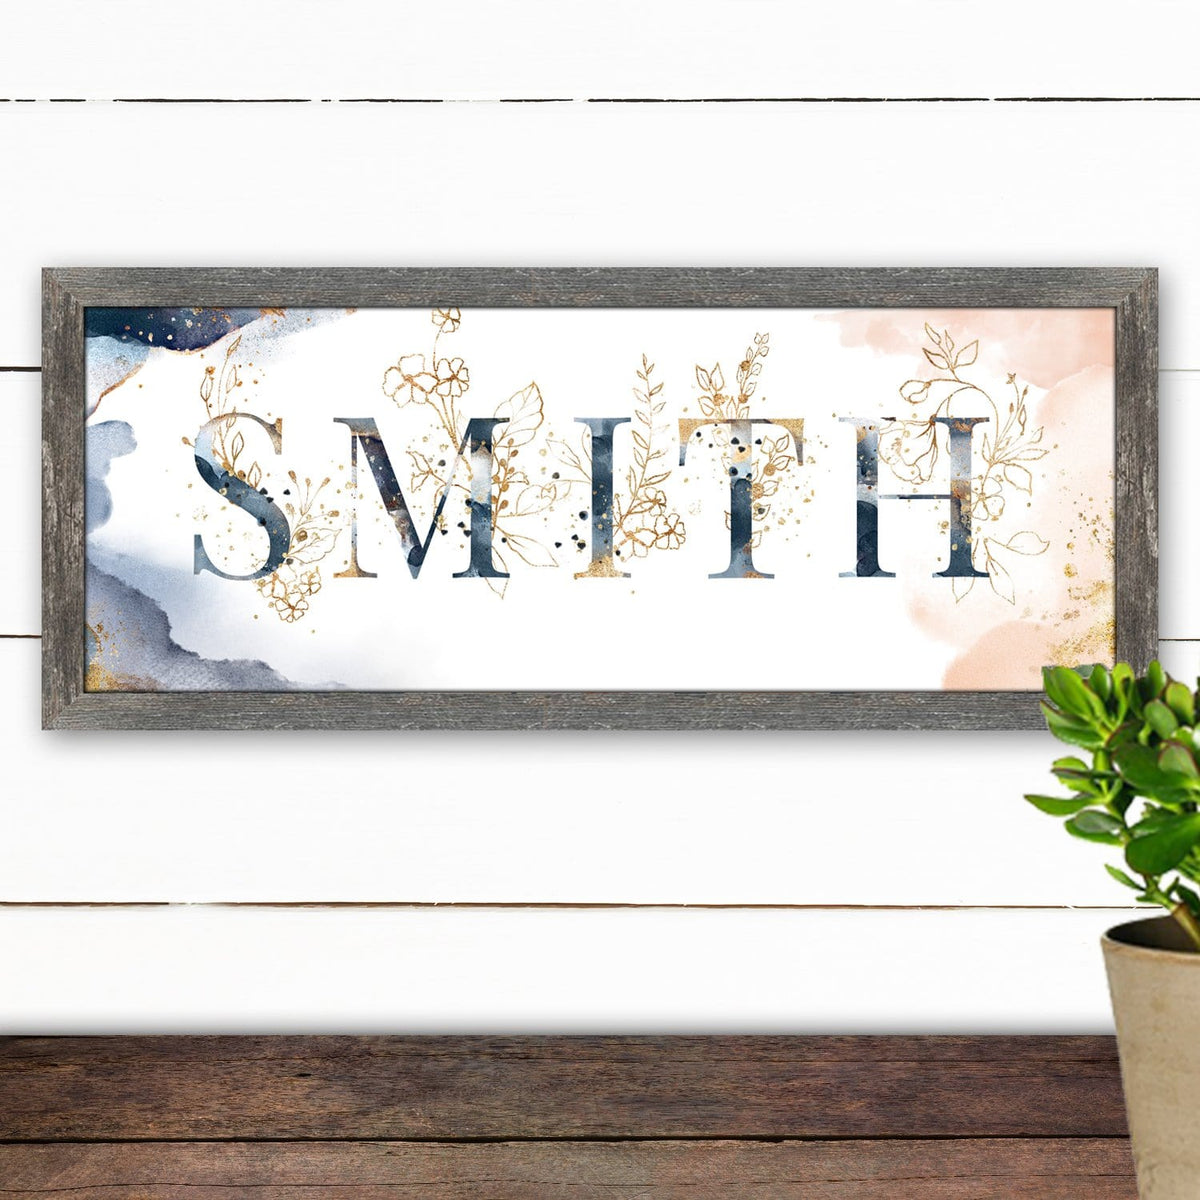 Personalized Wall Decor with your name in art - in room view